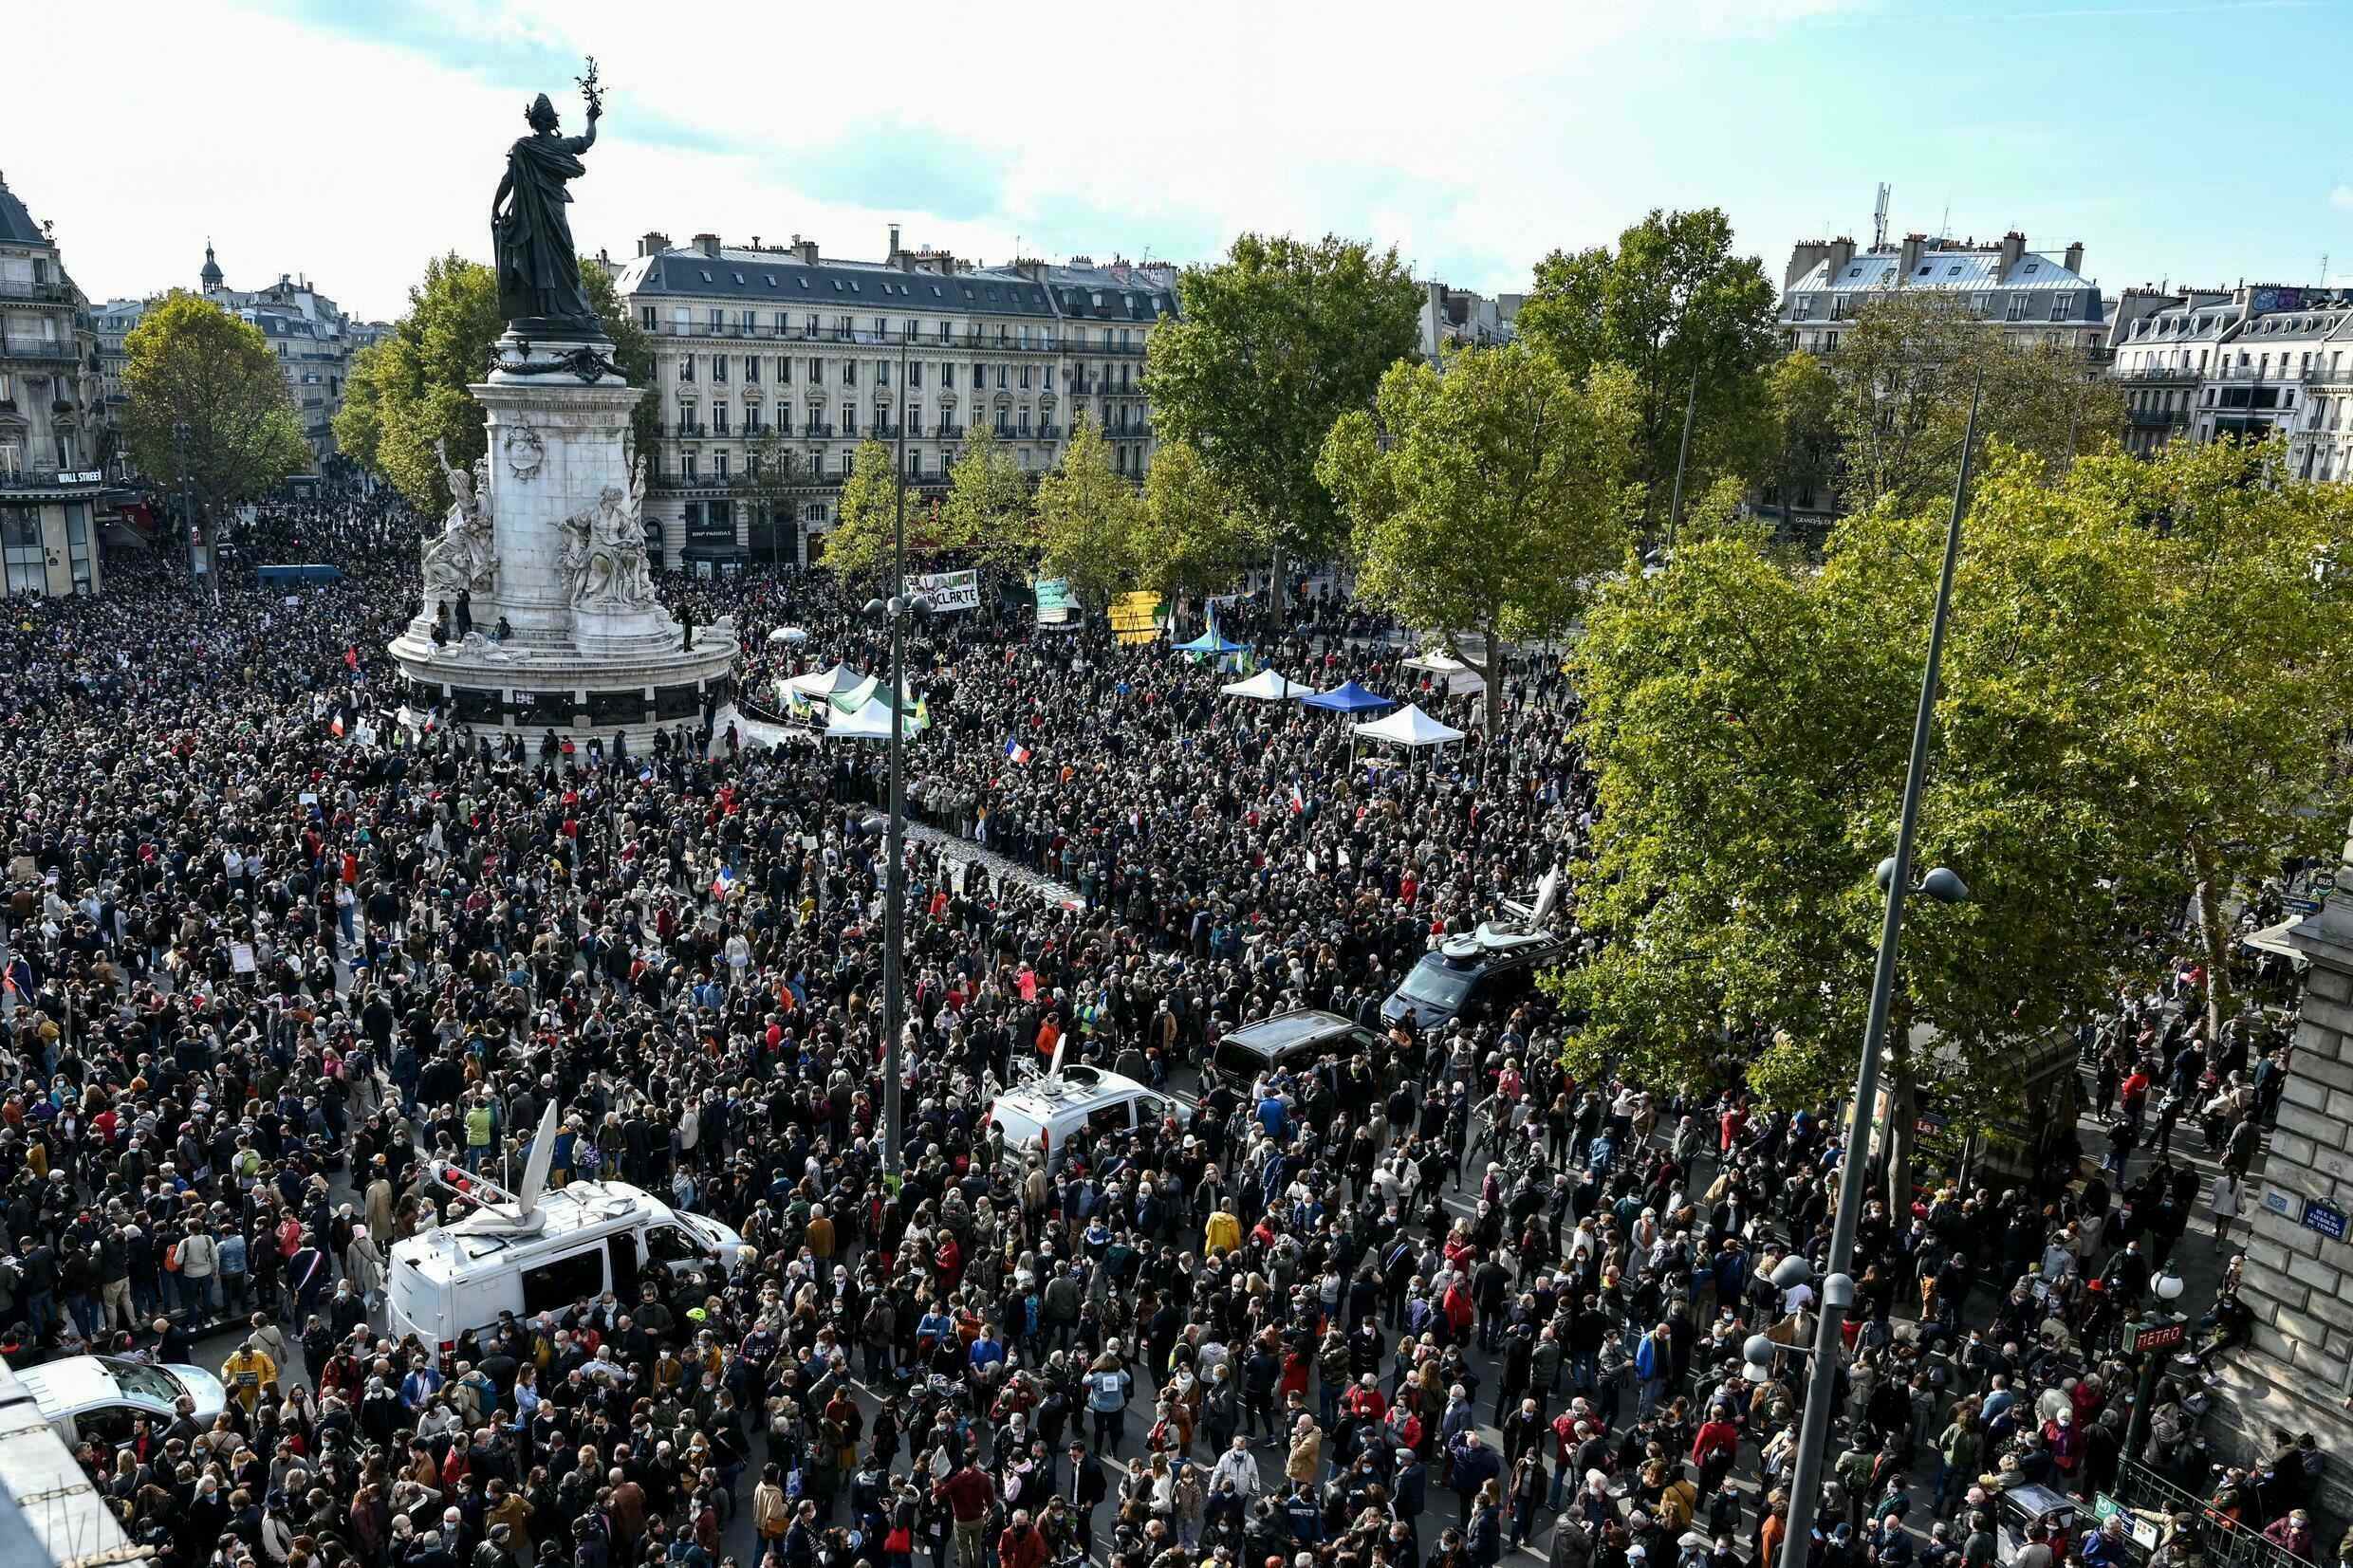 People gather on Place de la République in eastern Paris on October 18, 2020, in homage to teacher Samuel Paty two days after he was beheaded.